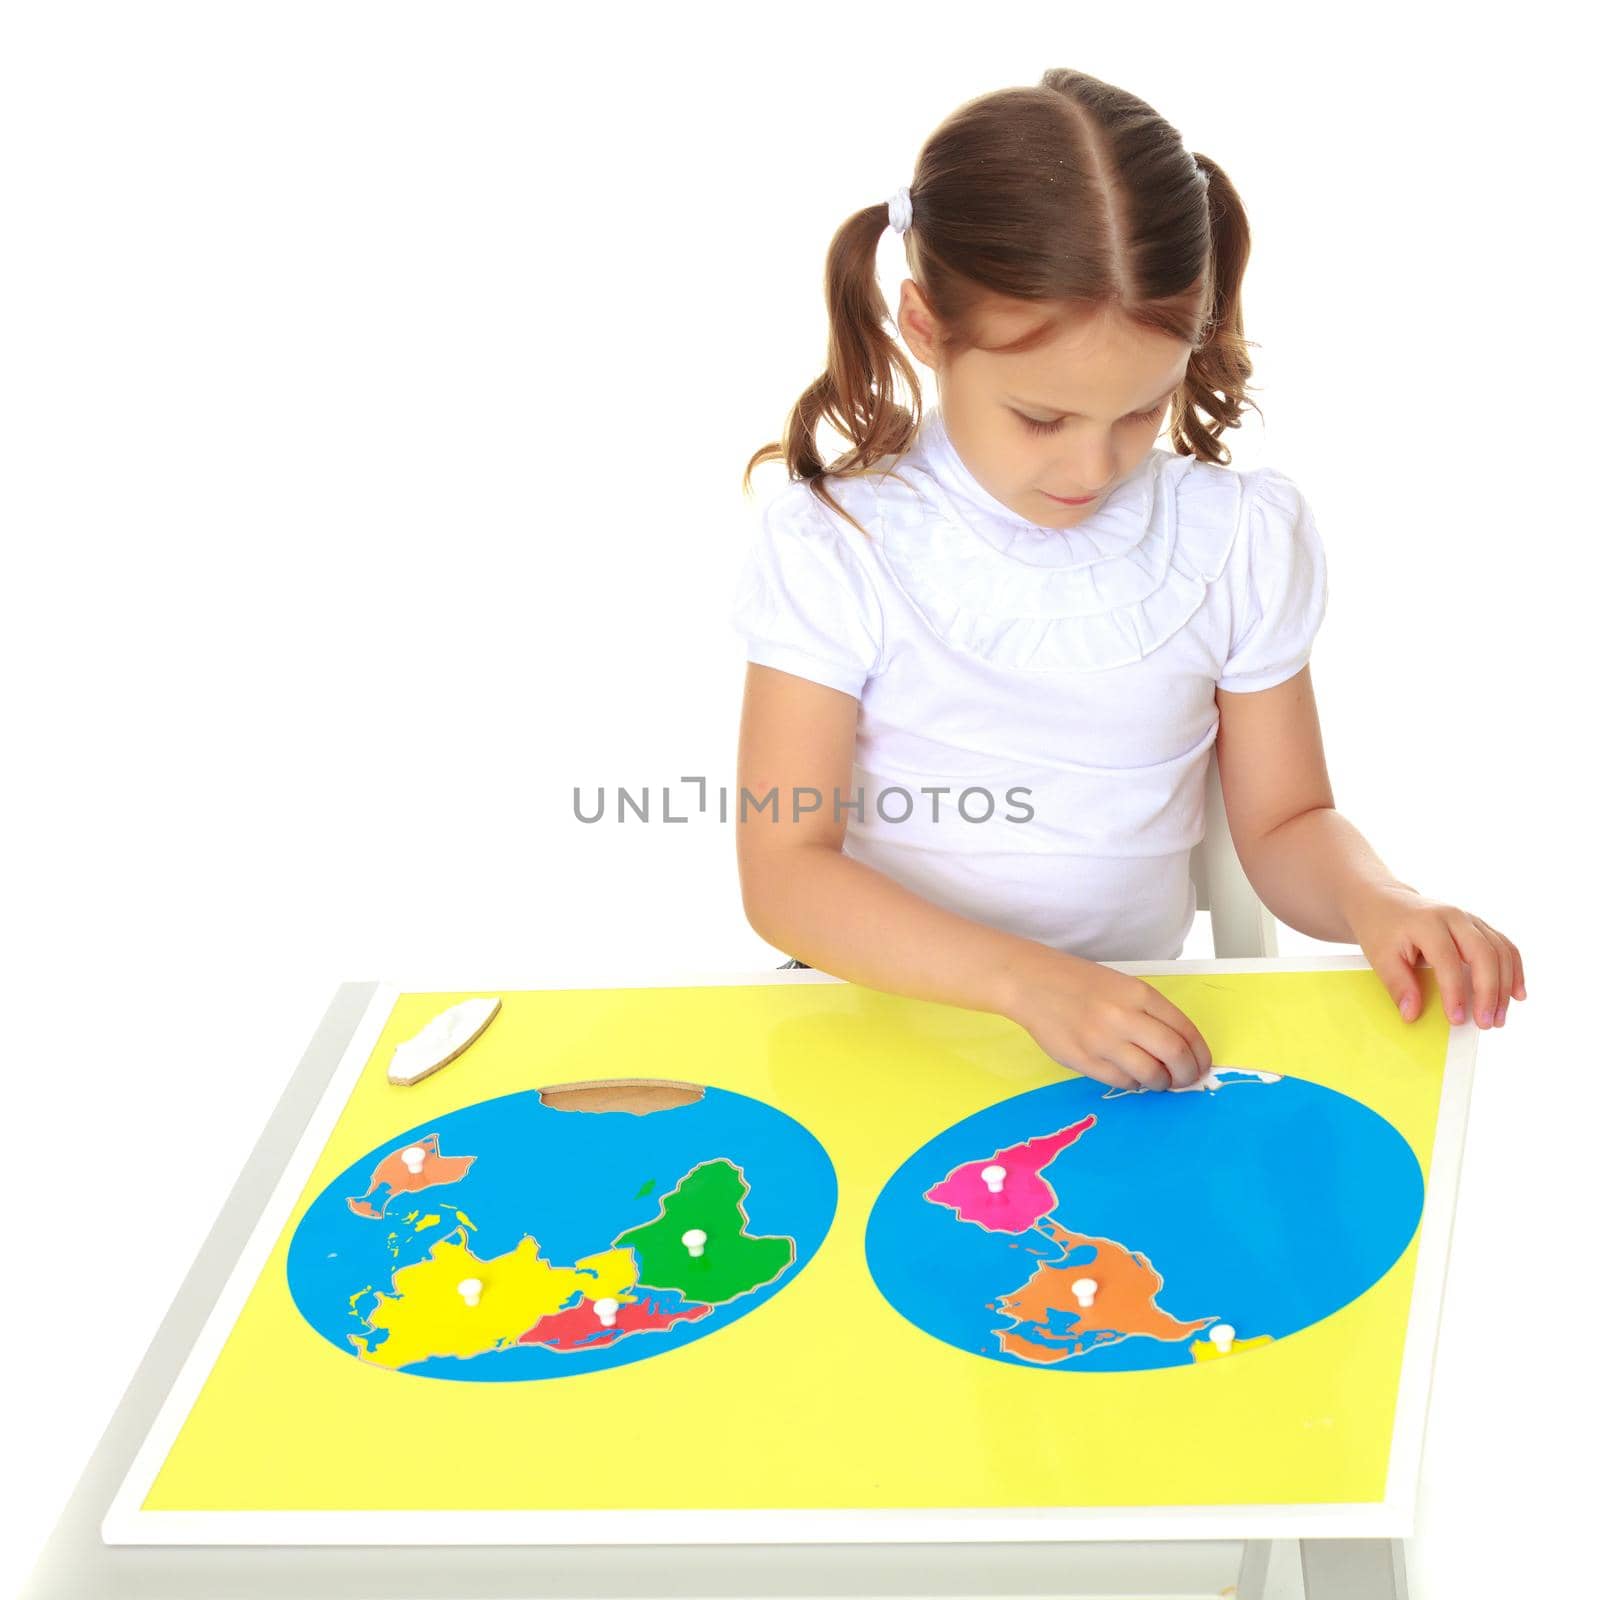 A little girl in Montessori kindergarten sits at a table and studies Montessori stuff. The concept of school and preschool education, harmonious development of the child. Isolated on white background.